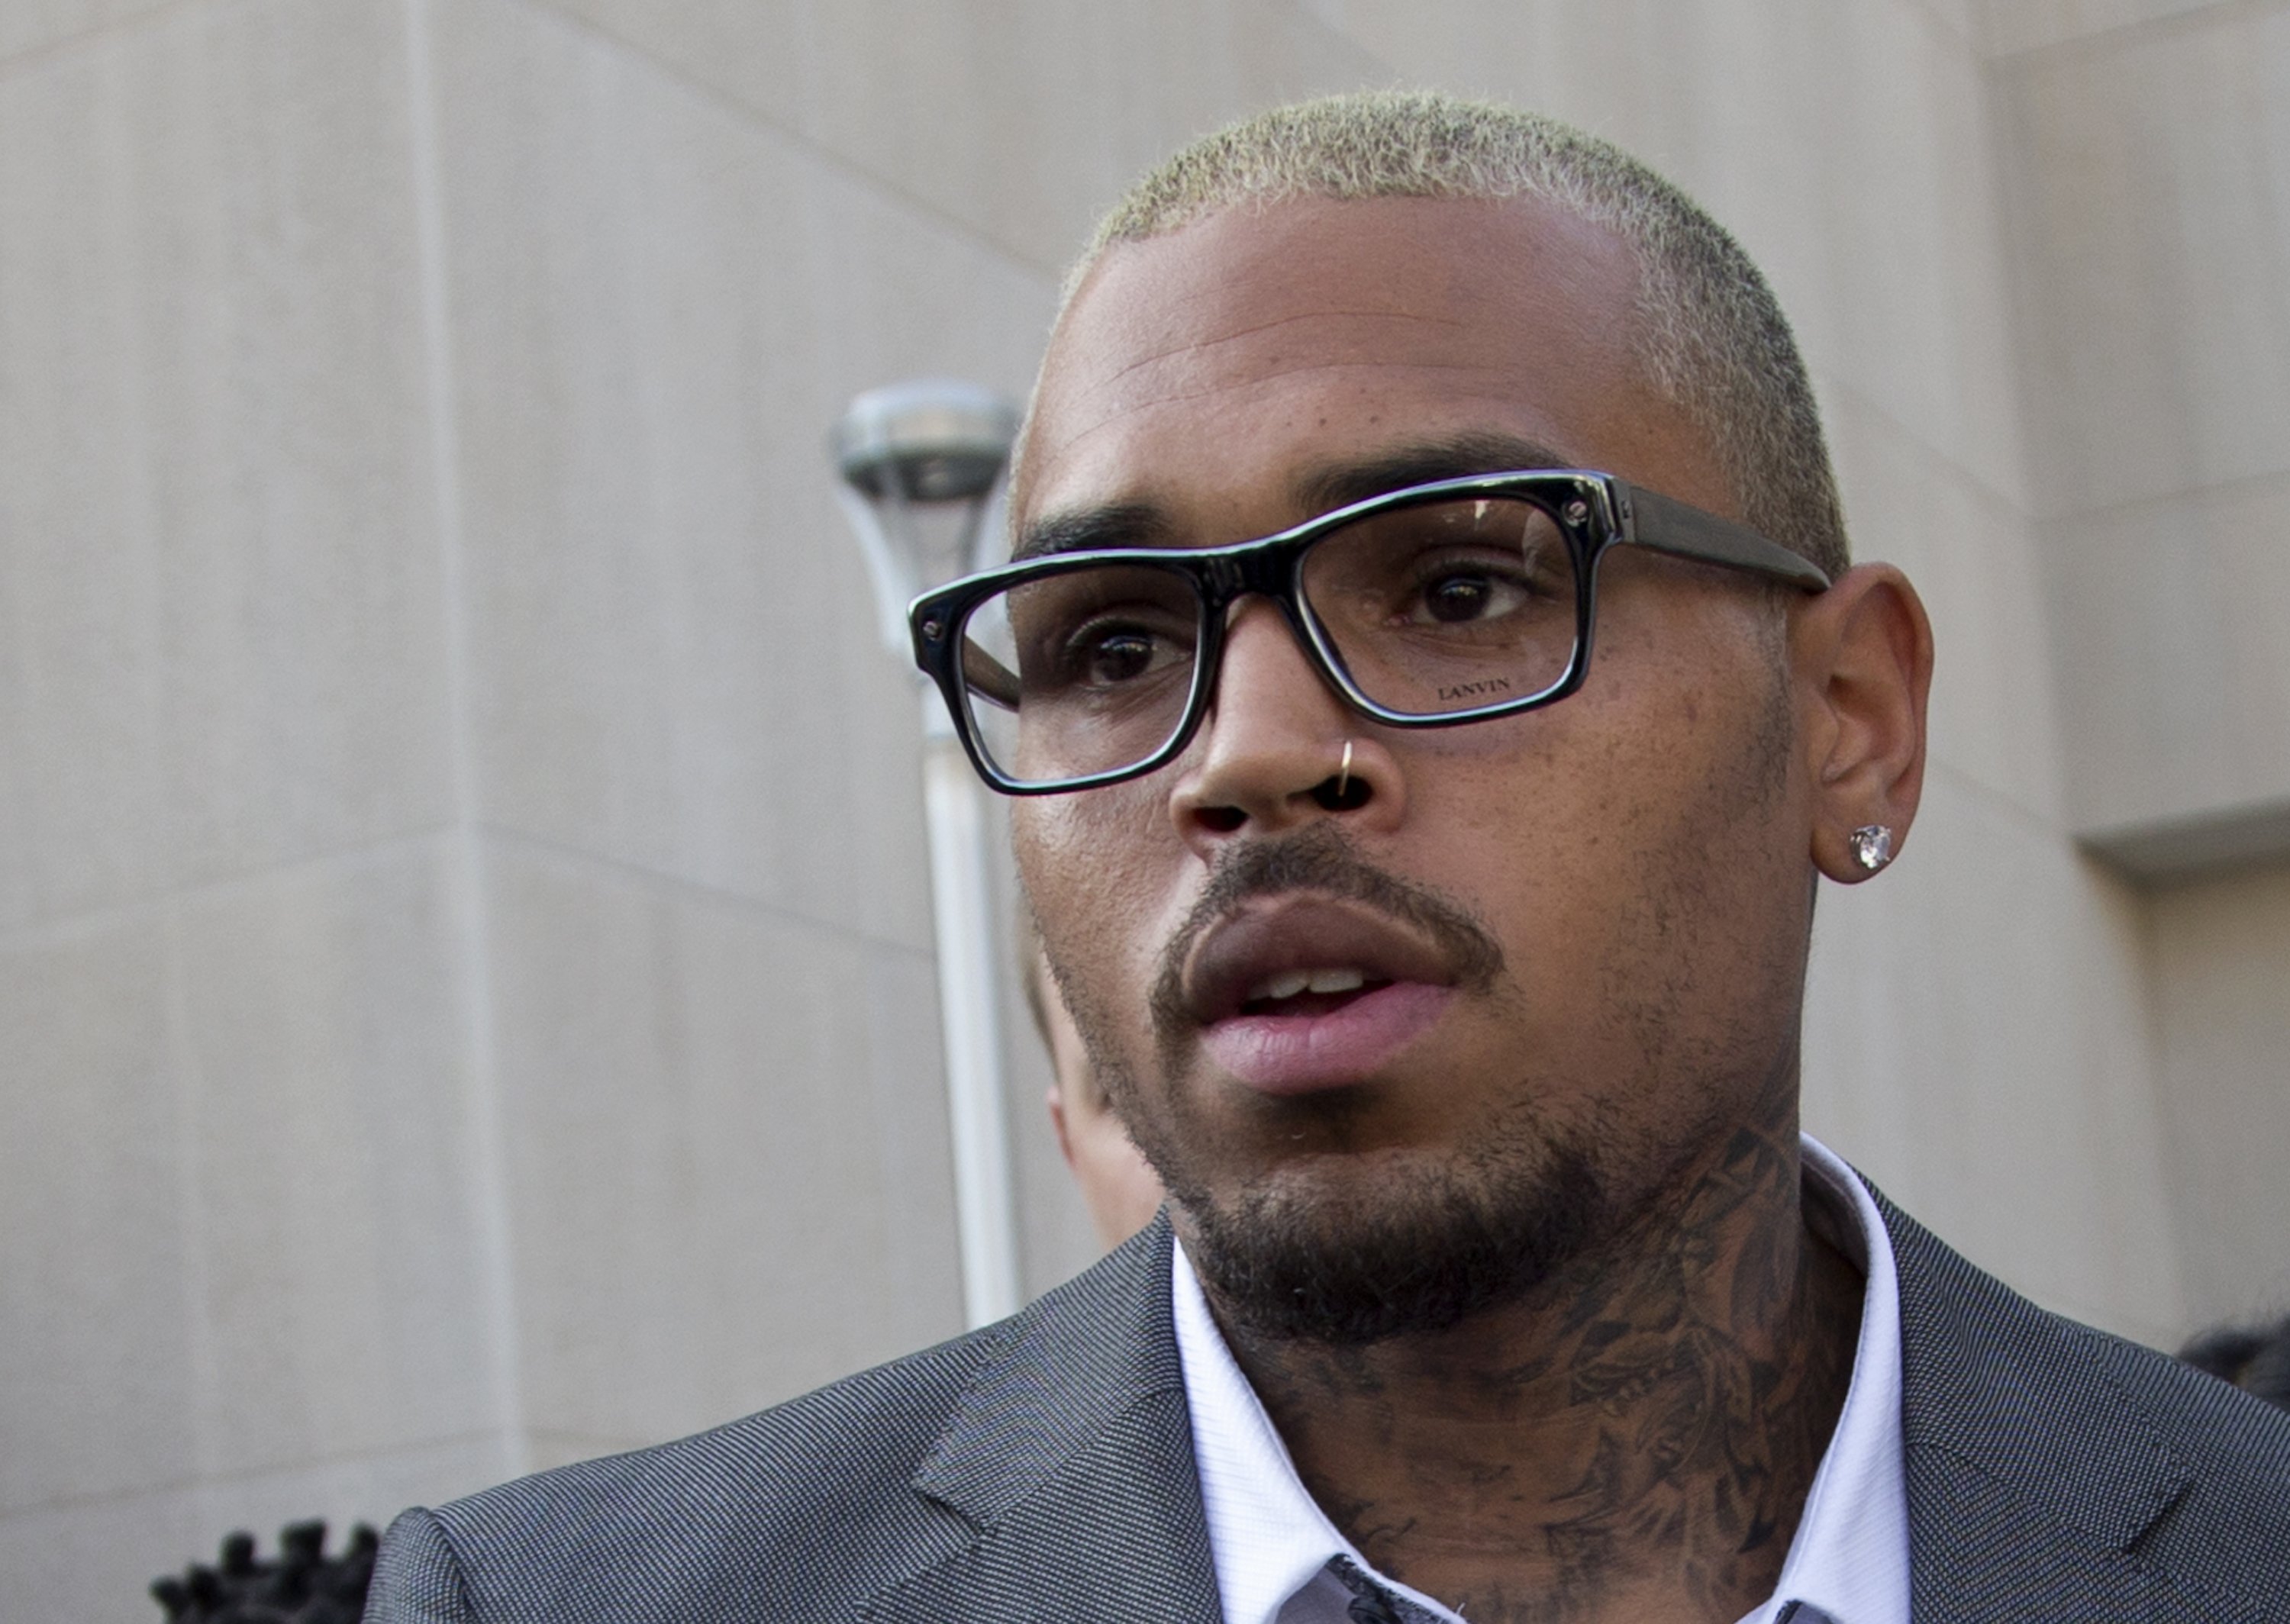 Singer Chris Brown leaves District of Columbia Superior Court after pleading guilty on a misdemeanor assault in Washington, Sept. 2, 2014. (Manuel Balce Ceneta—AP)